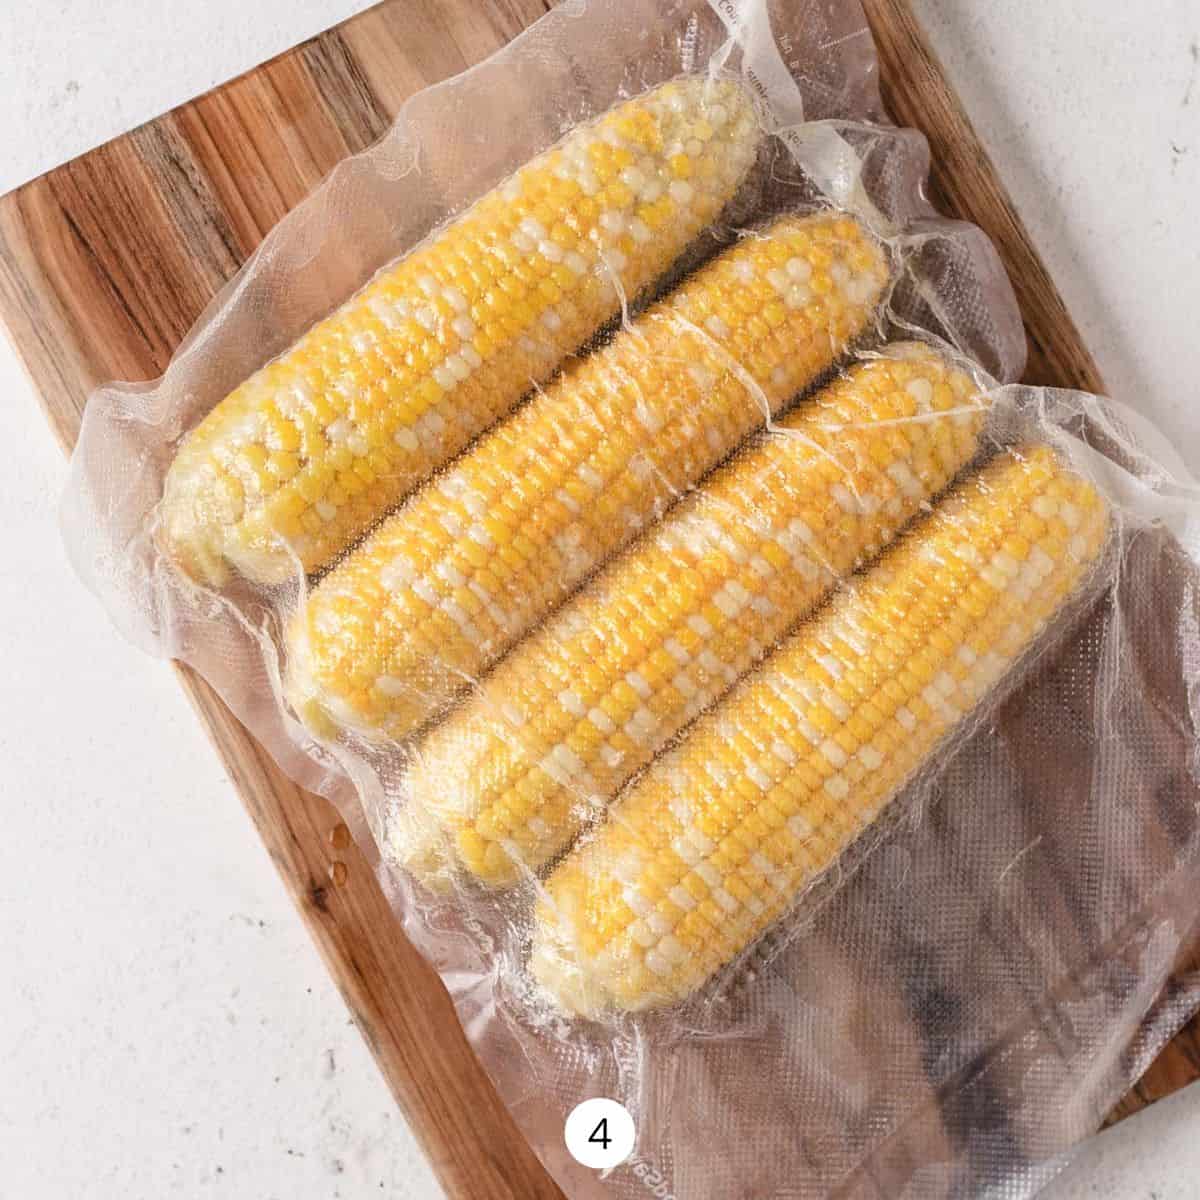 Sous vide bag of corn on top of a wooden cutting board.